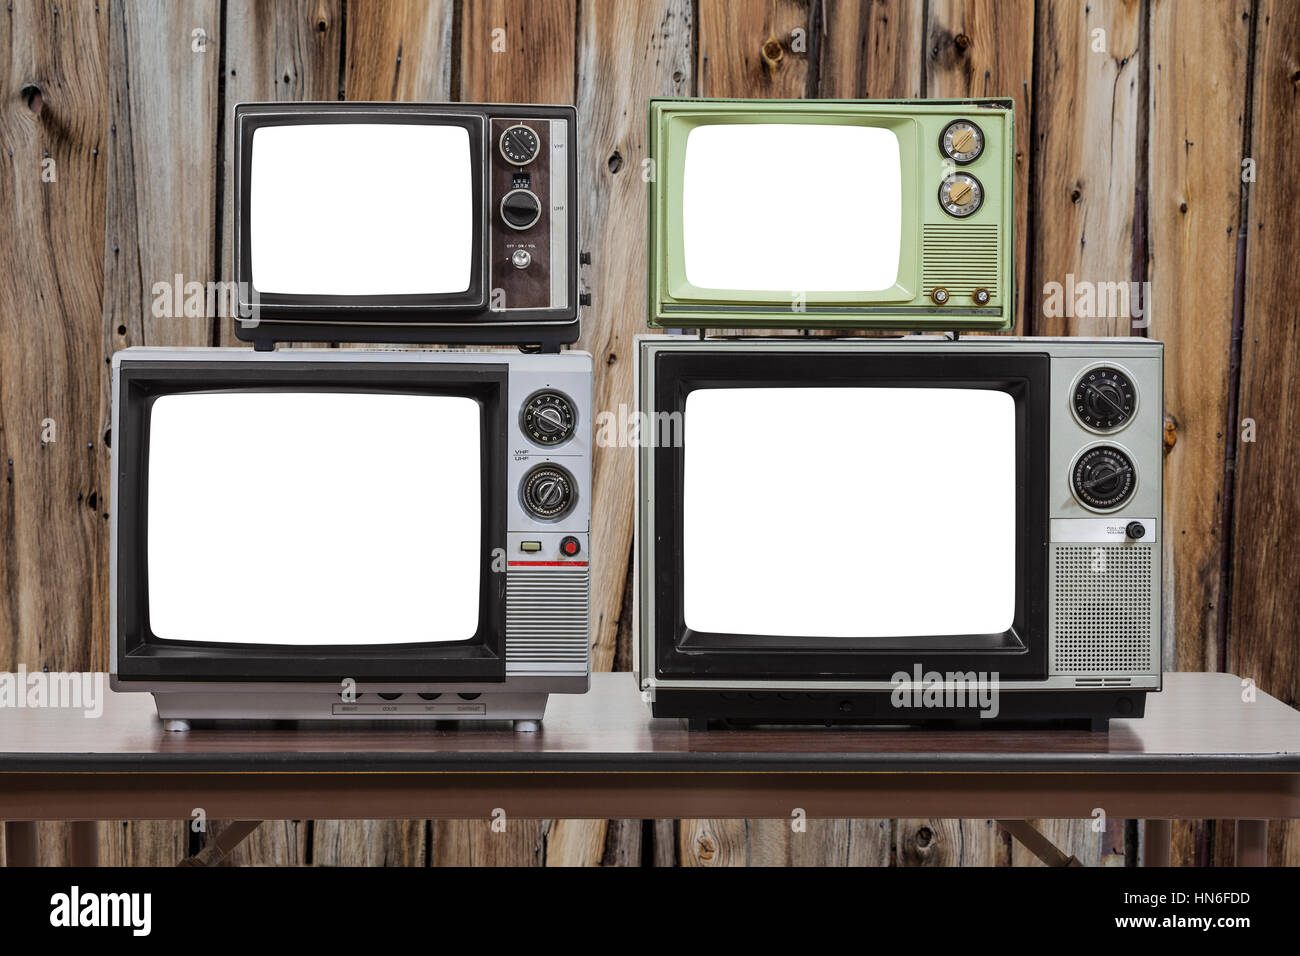 Four vintage televisions with cut out screens and old wood wall. Stock Photo